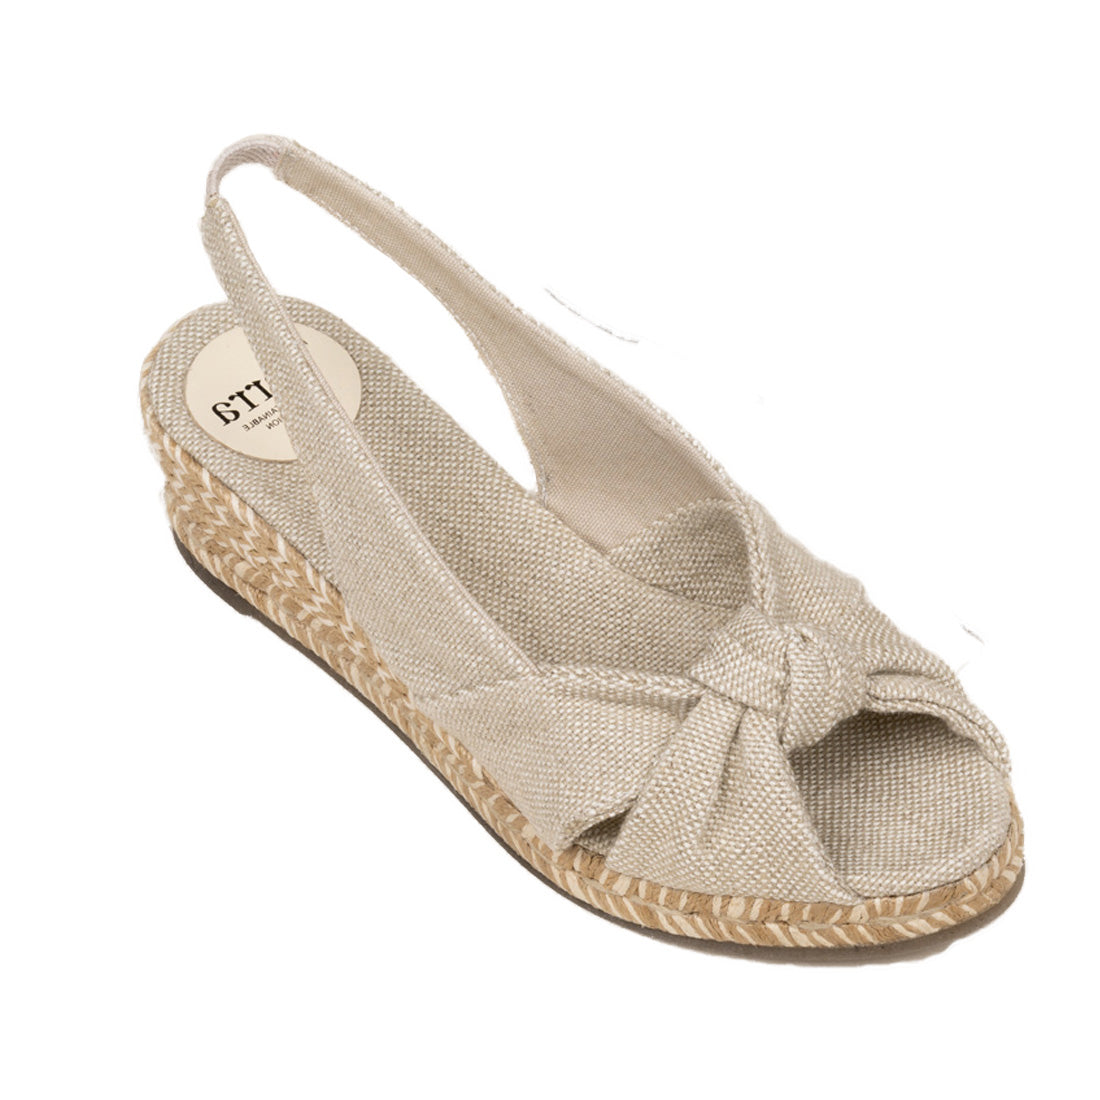 MARGARET Natural | TIERRA Collection | espadrilles wedges - Badt and Co